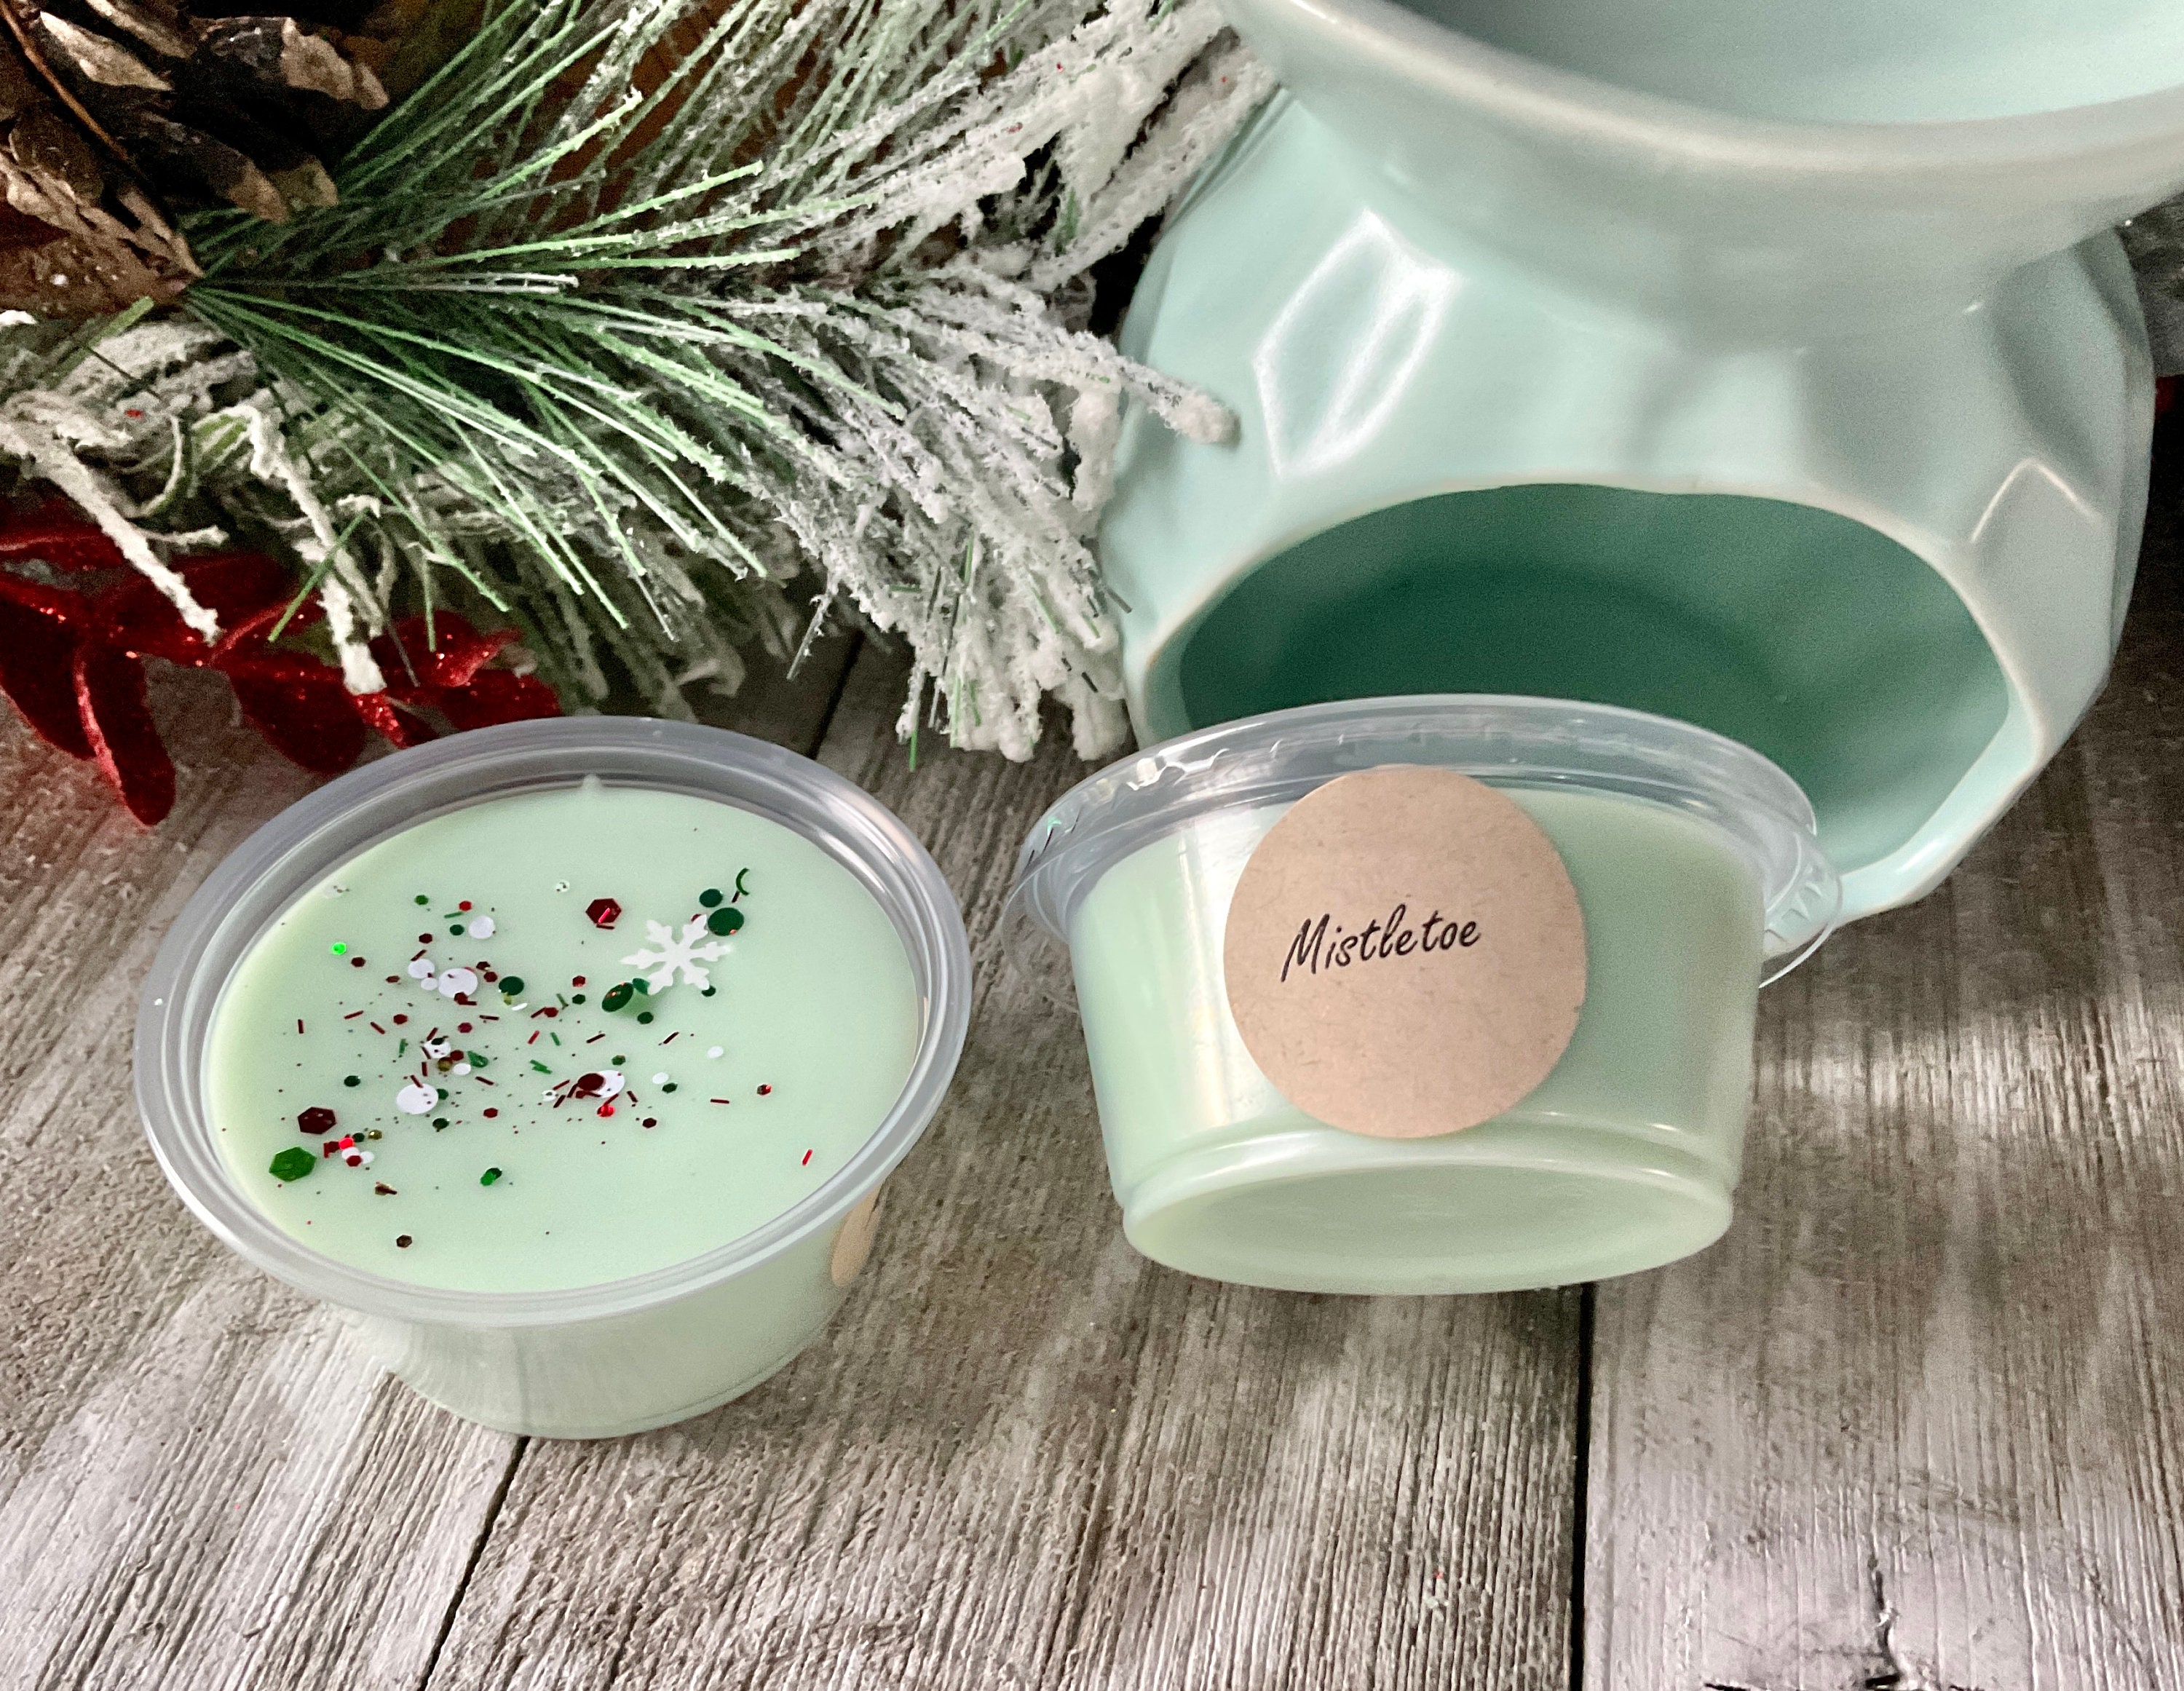 Mistletoe - Natural Soy Wax Candle - Craft + Foster